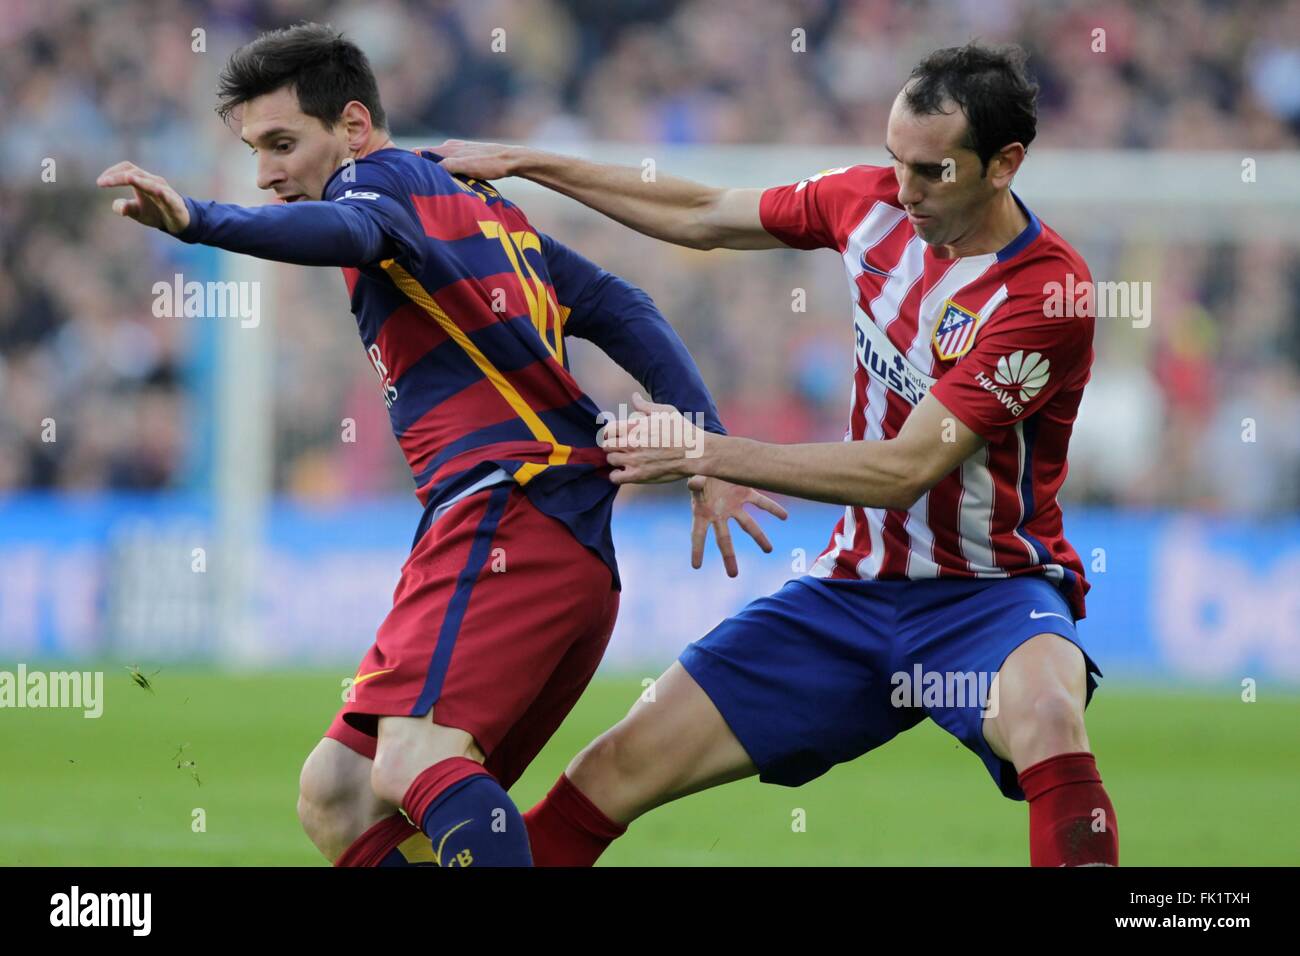 Diego Godin in action during the La Liga match FC Barcelona - Atlético Madrid January 30, 2016 at the Camp Nou, Barcelona, Spain Stock Photo